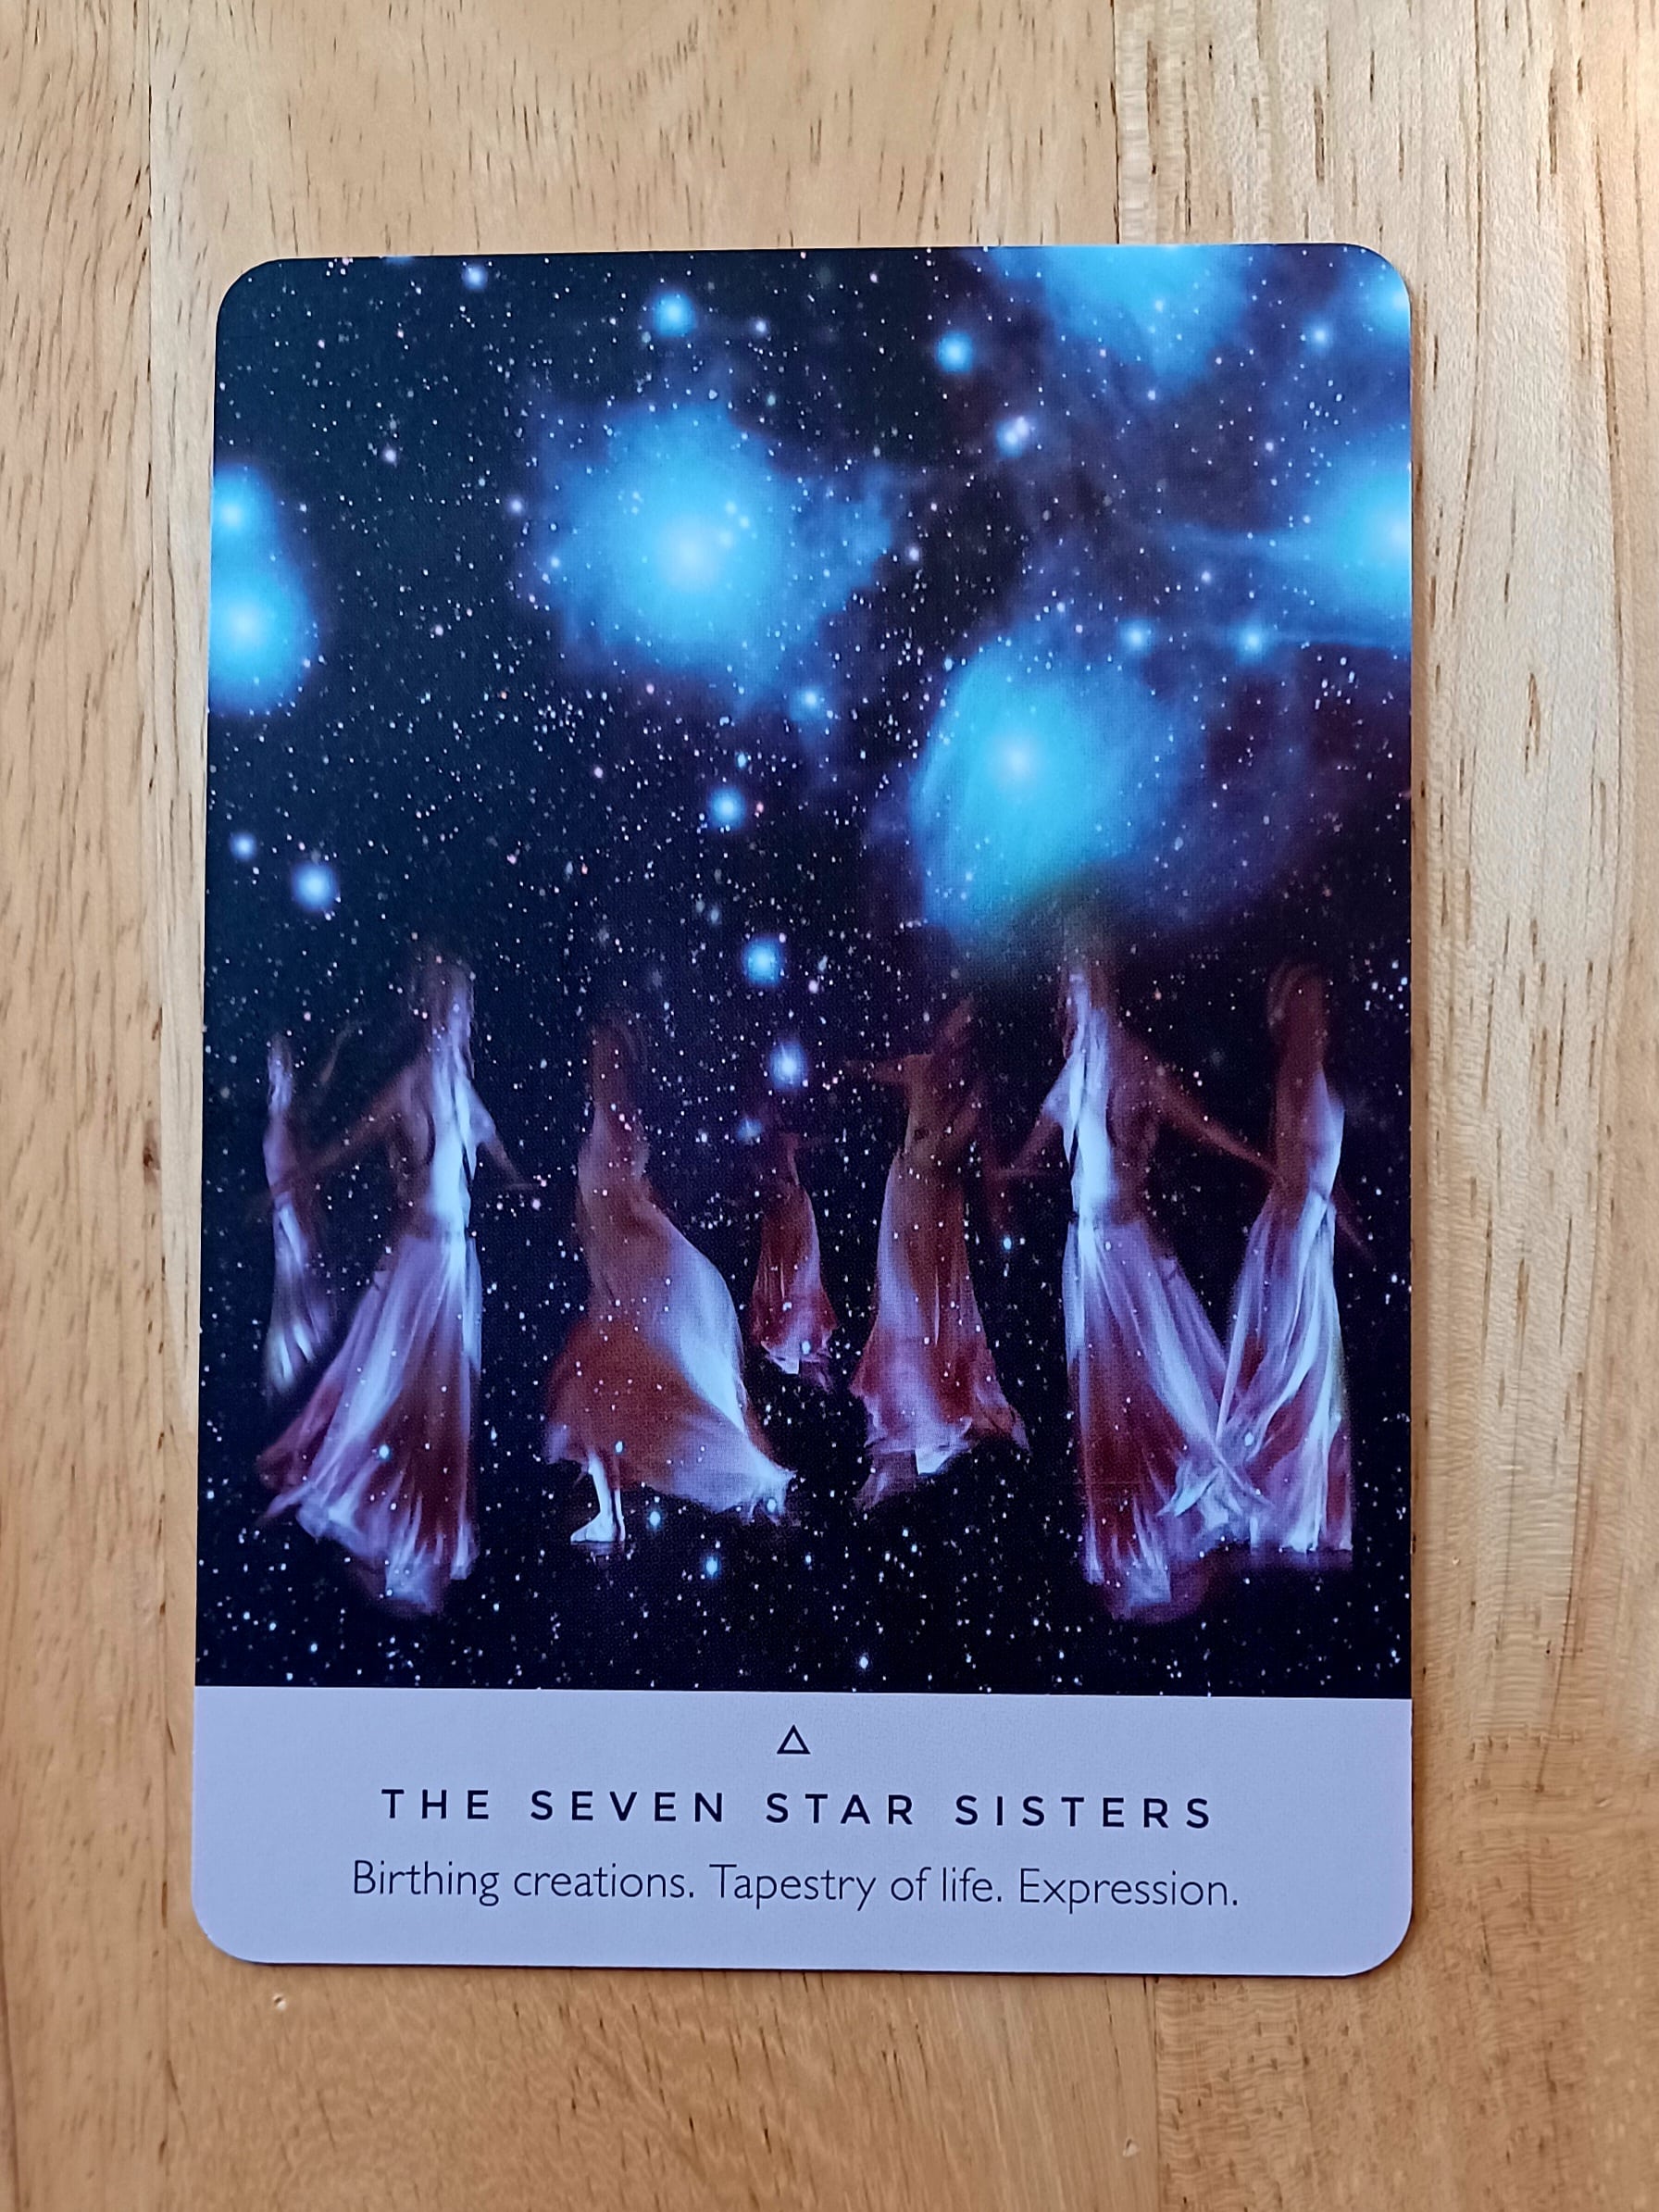 the seven year sisters